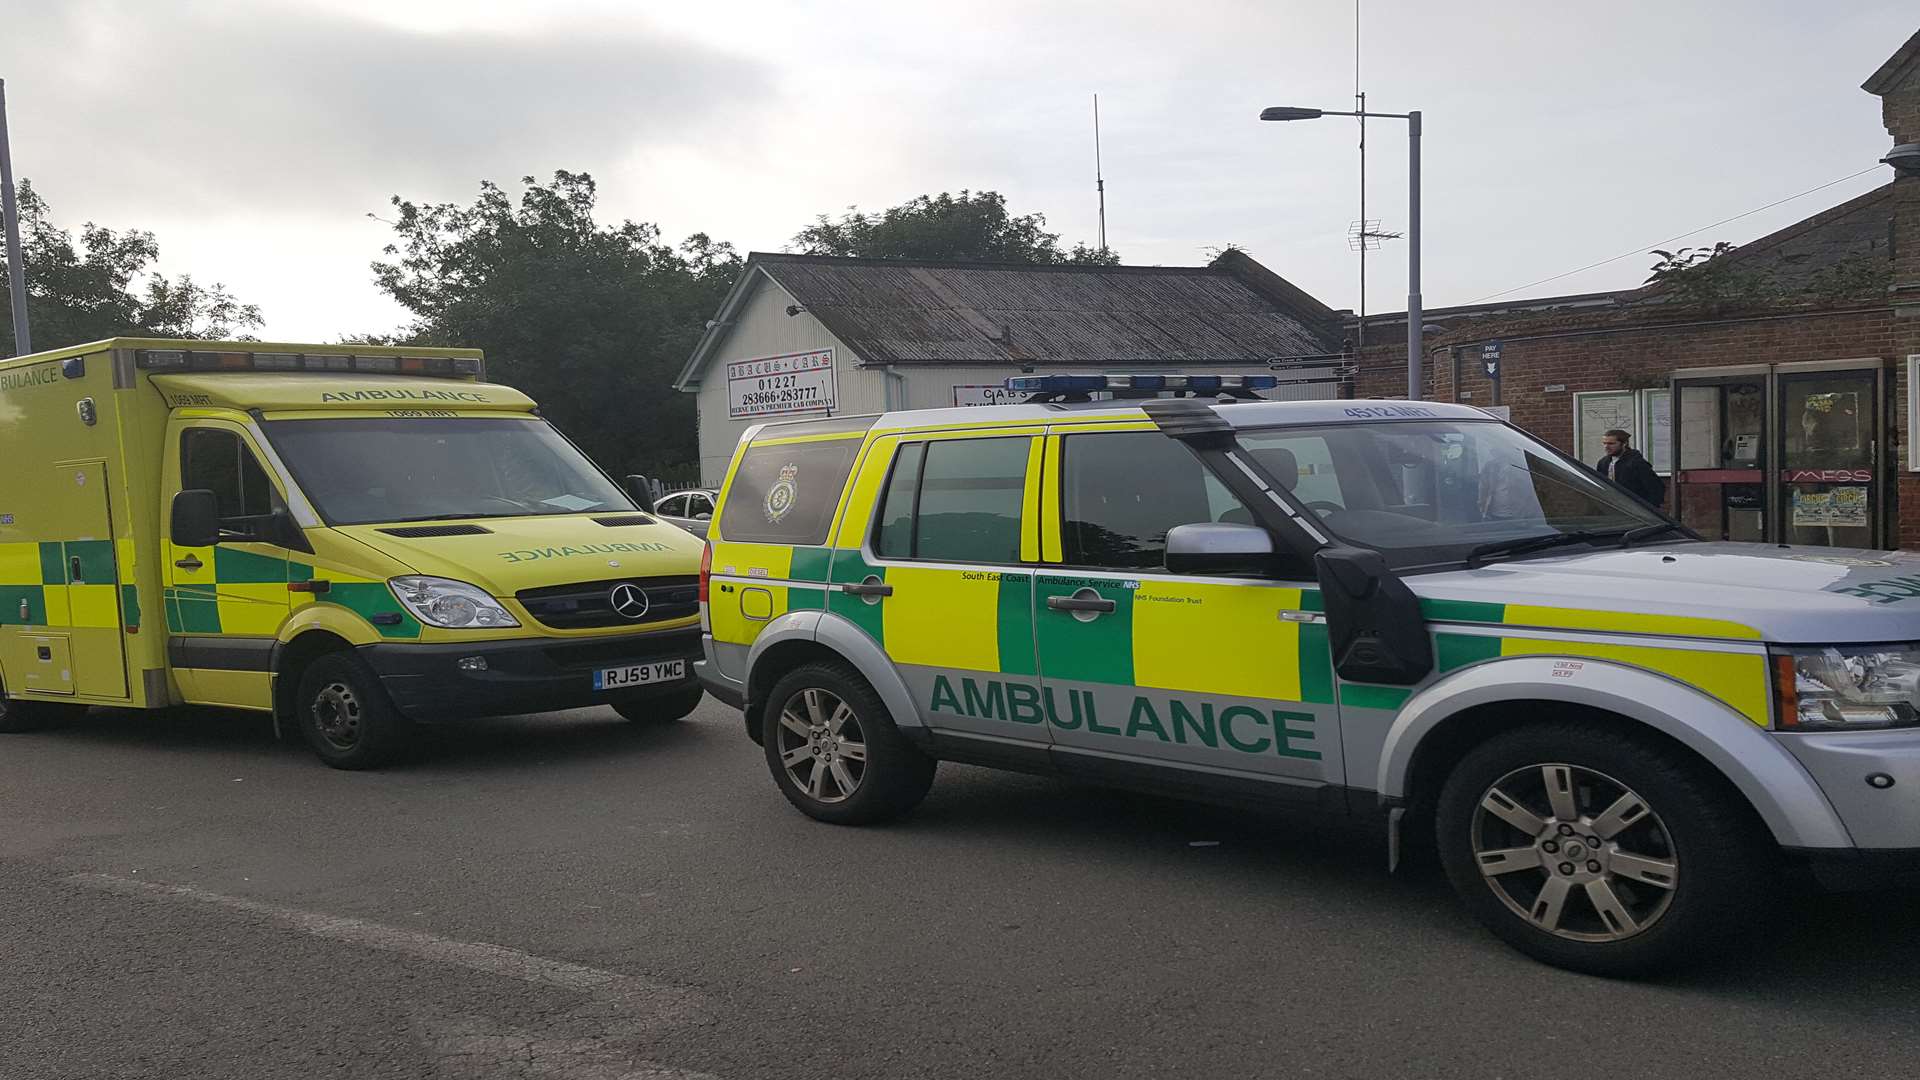 Several emergency vehicles were called to Herne Bay station